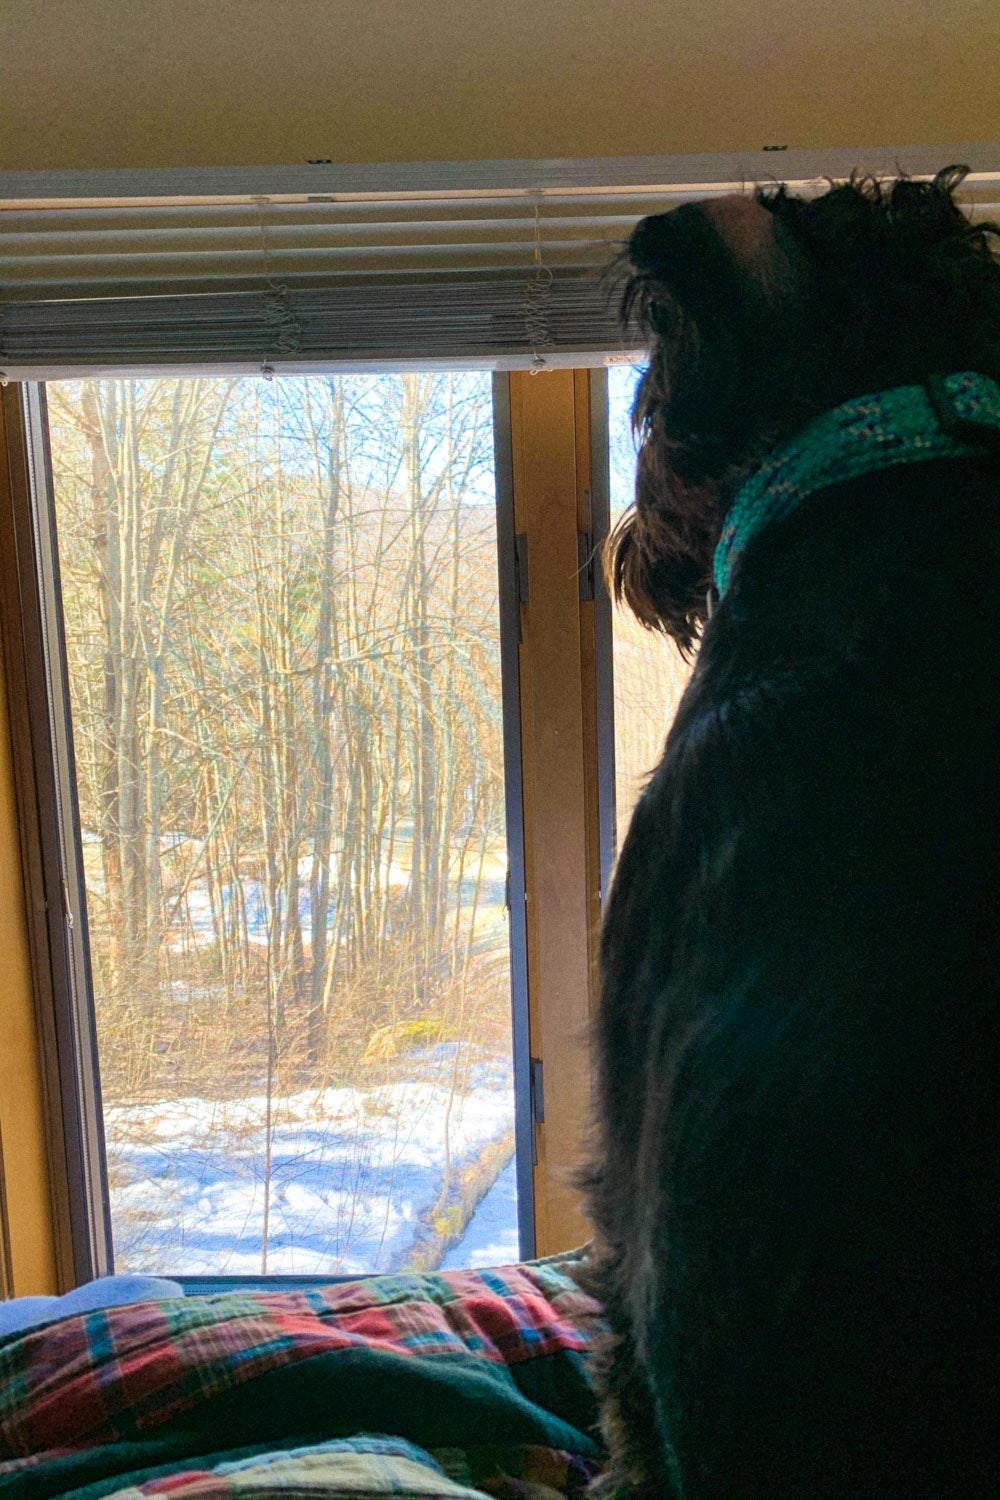 A dog looking out the window at a forest.